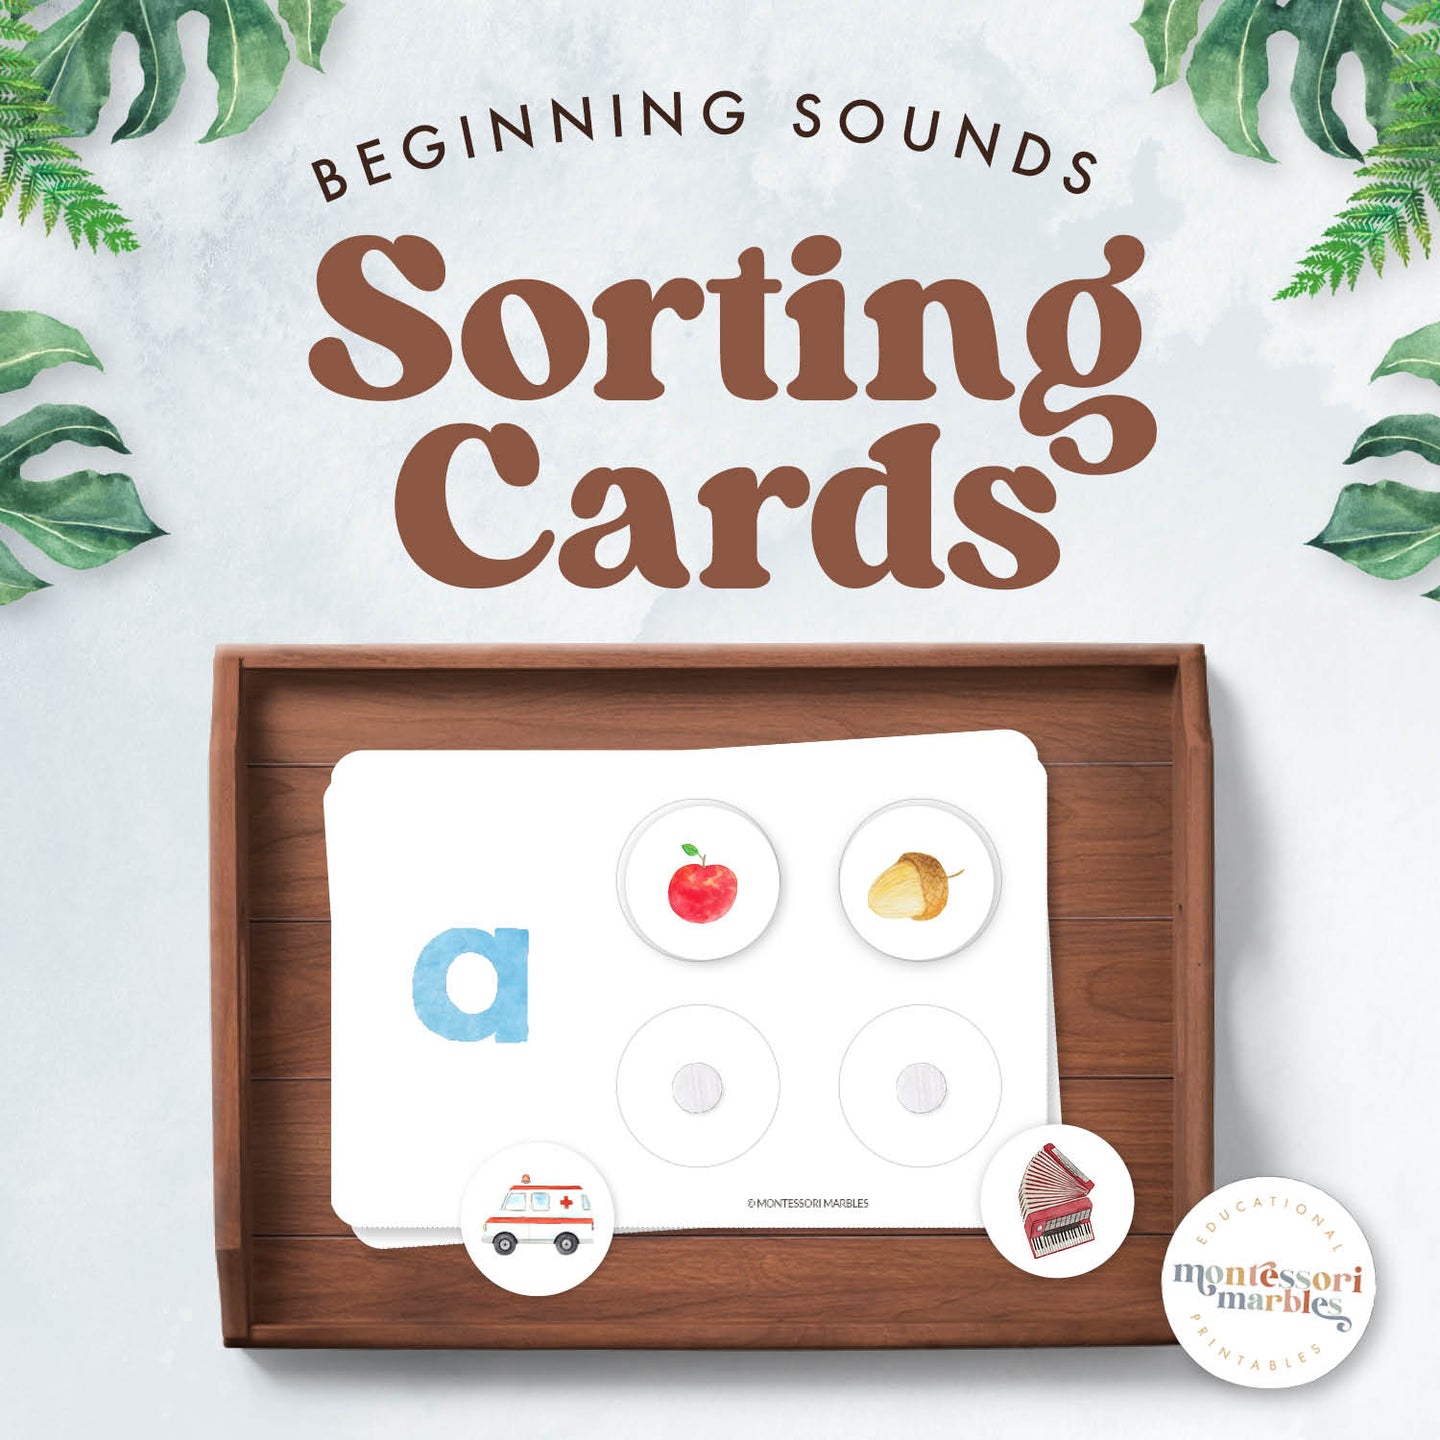 Beginning Sounds Sorting Cards